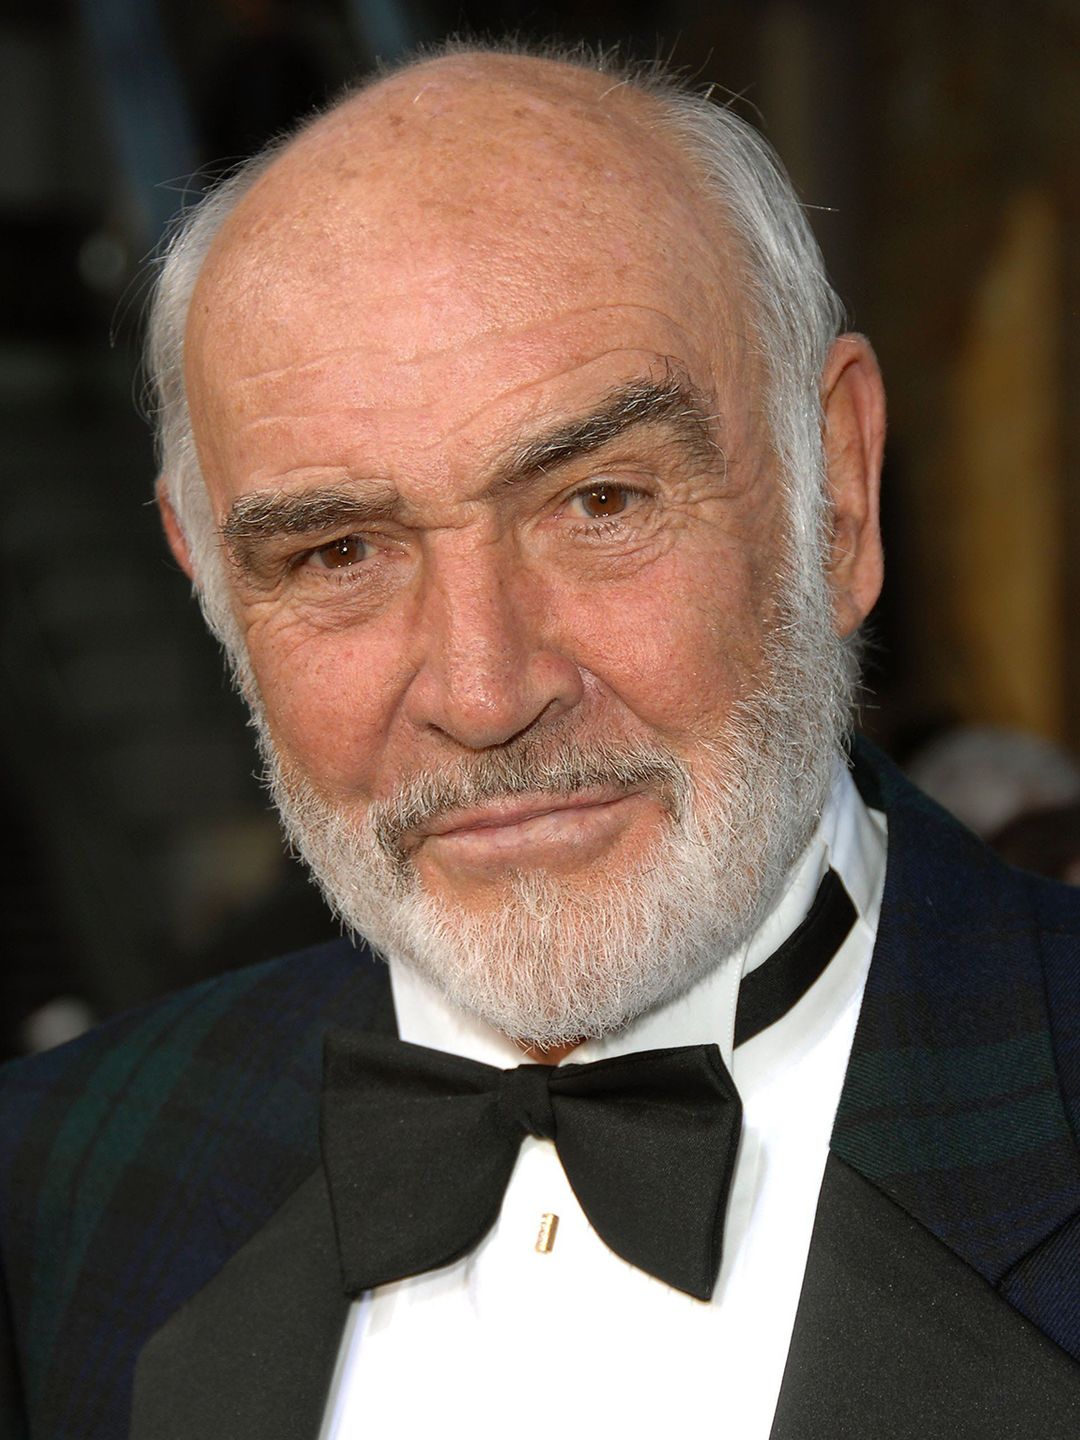 Sean Connery who is his father